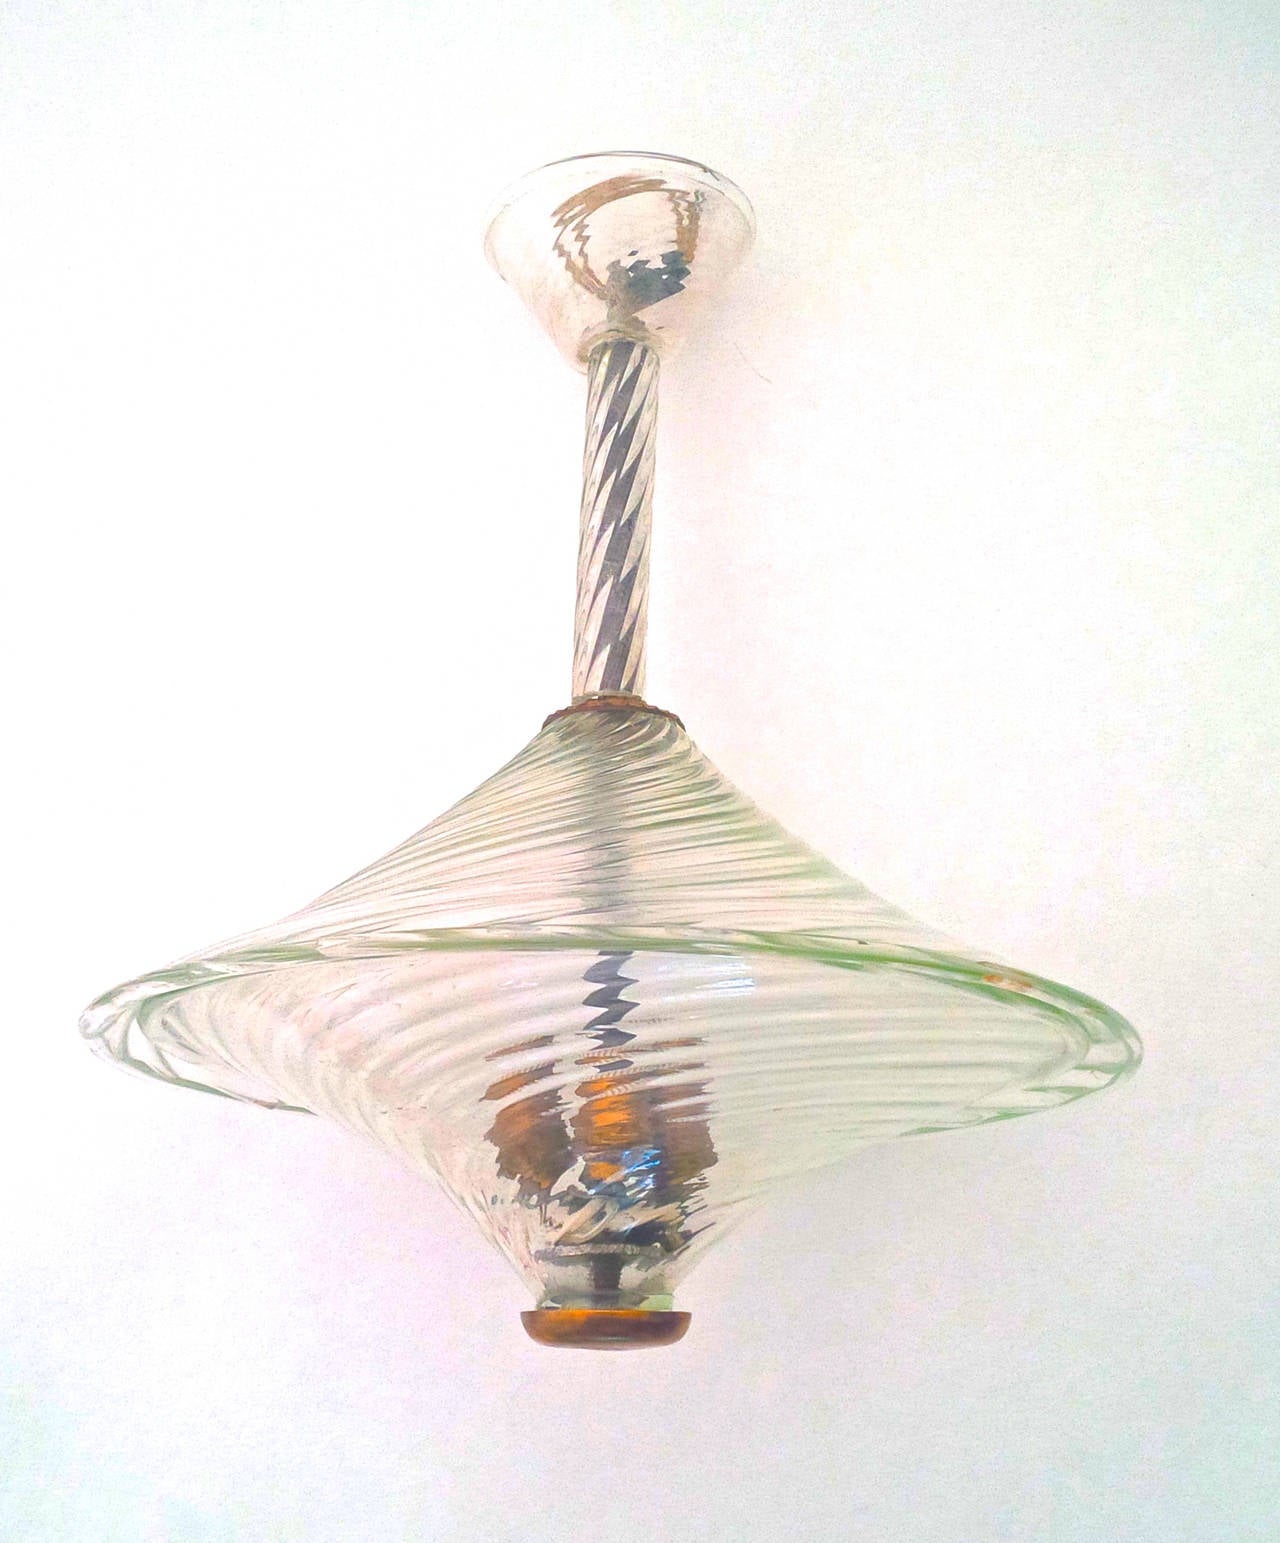 An elegant Murano hand blown glass pendant from the 1940's manufactured by Italy's oldest glass company. This design has a spiralled ceiling cup, stem and diffuser which consists of two parts. Suited for 3 small fitted bulbs.